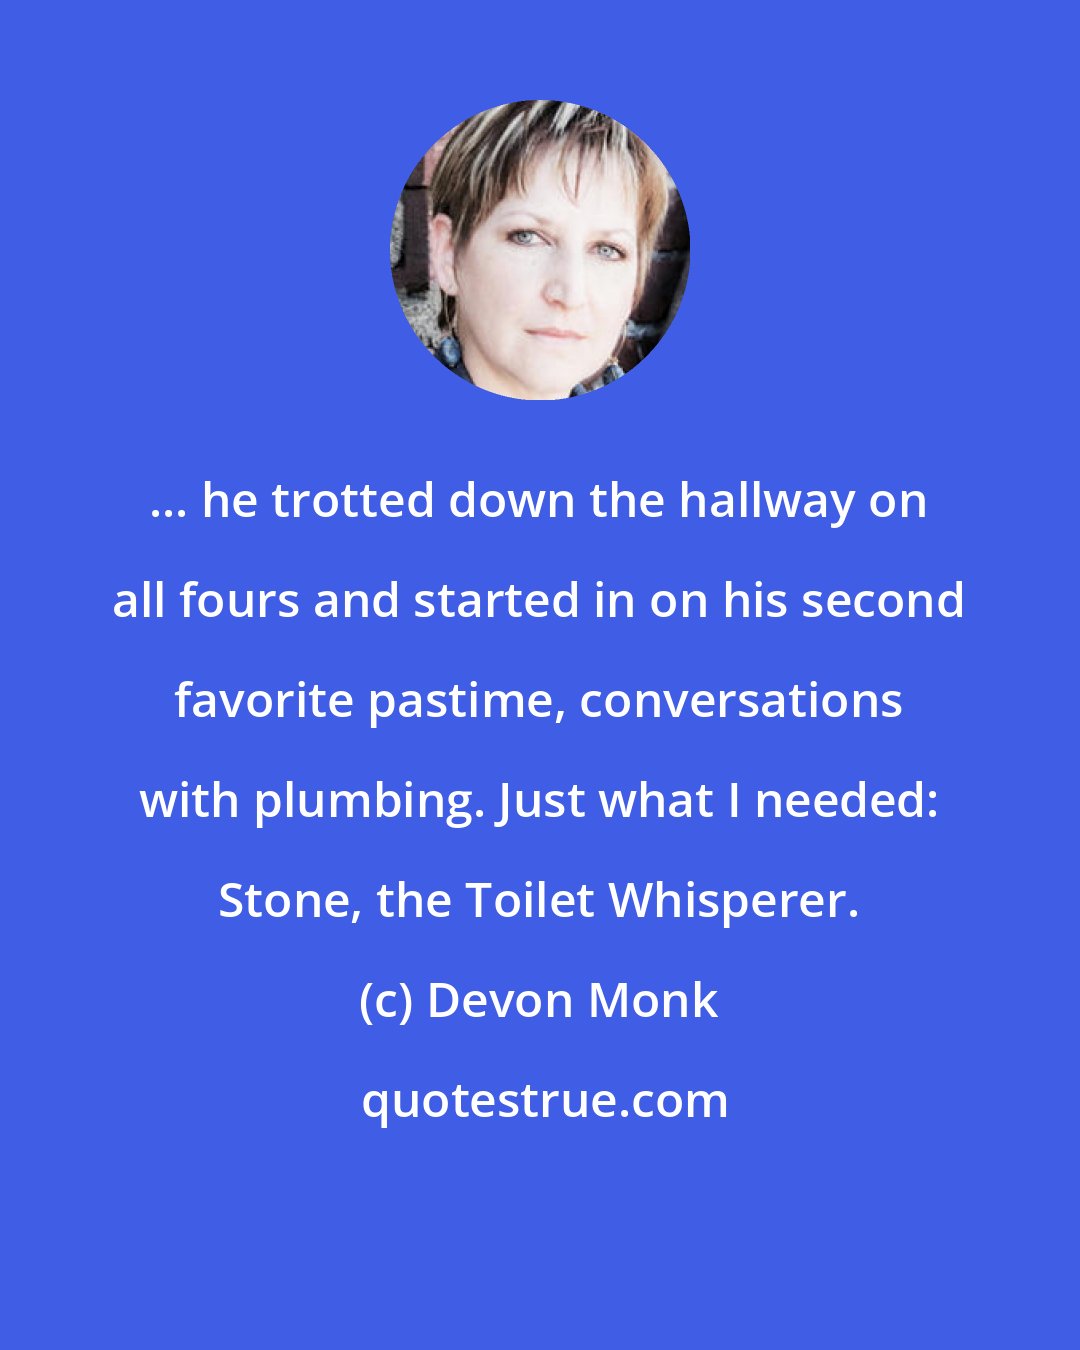 Devon Monk: ... he trotted down the hallway on all fours and started in on his second favorite pastime, conversations with plumbing. Just what I needed: Stone, the Toilet Whisperer.